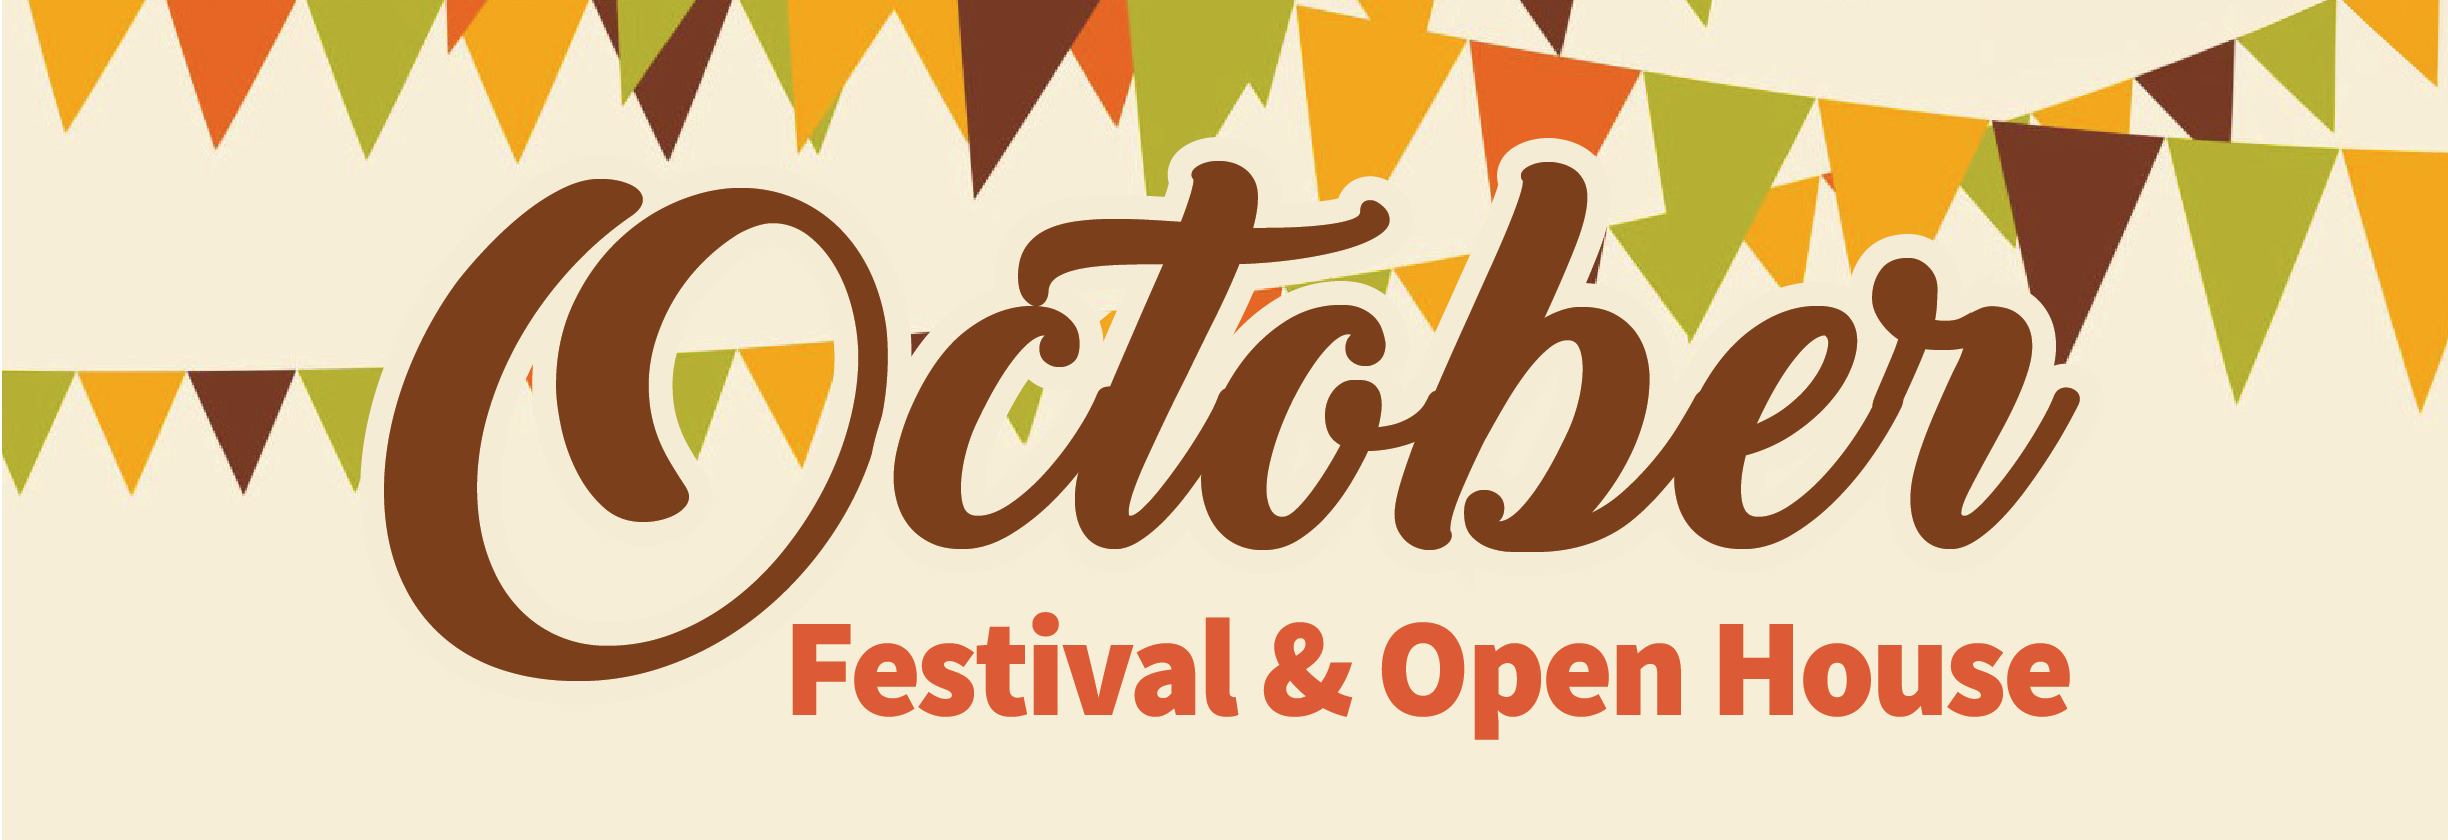 October Festival and Open House on beige header with fall-colored pennant flags